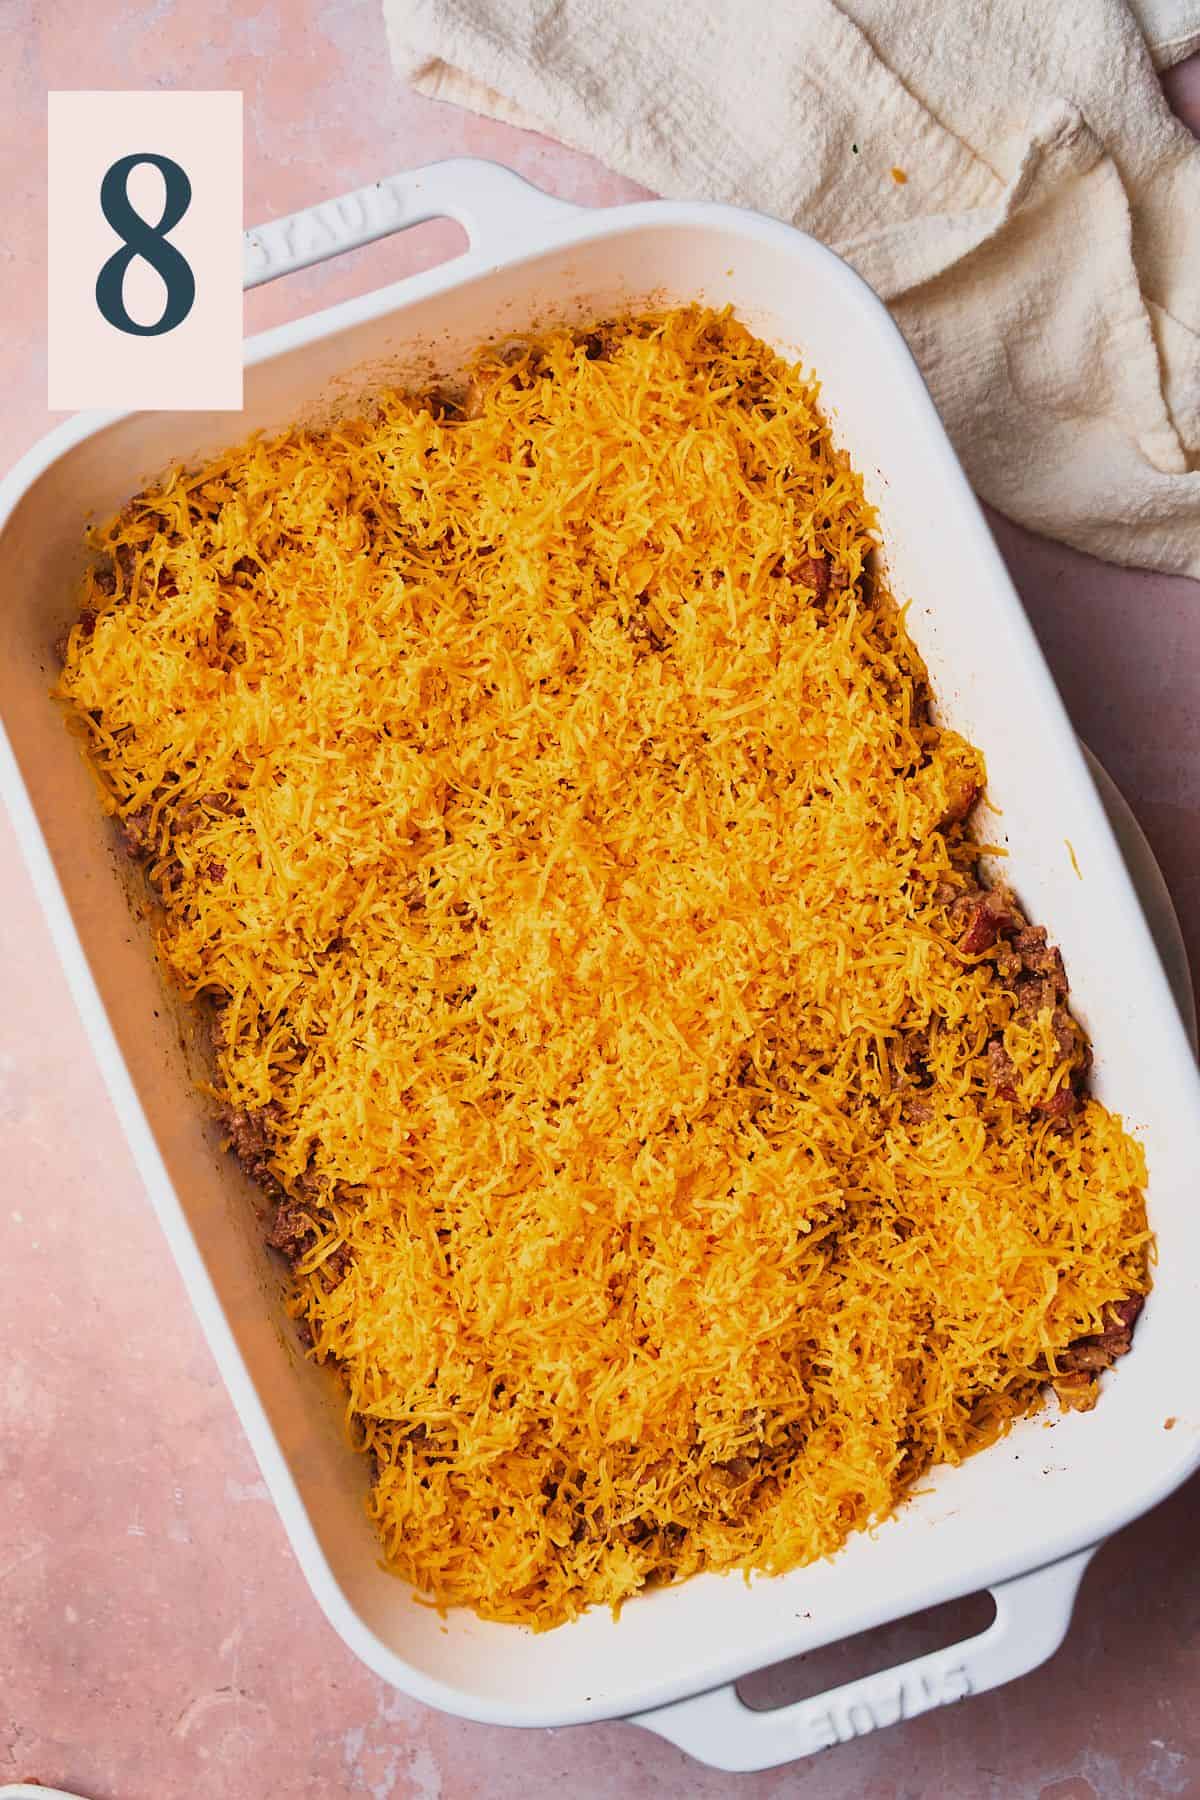 Shredded cheese covering beef and potatoes in a casserole dish. 